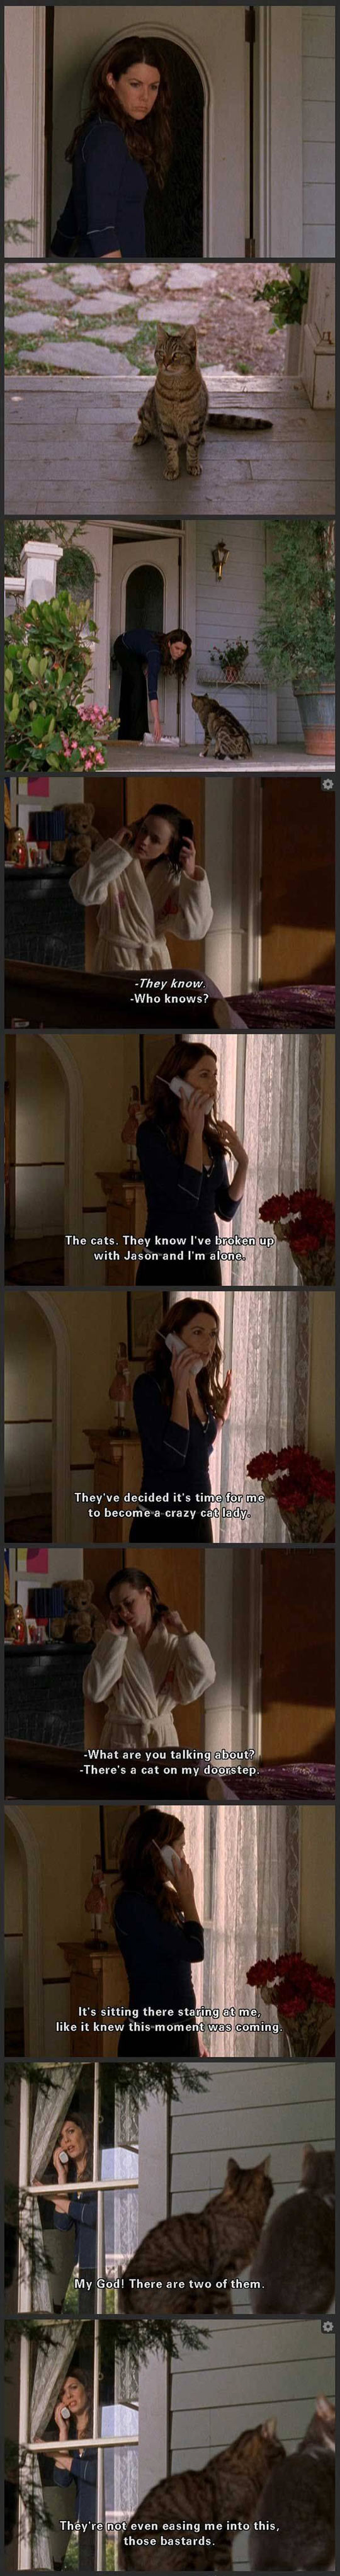 cool-gilmore-girls-crazy-cat-lady